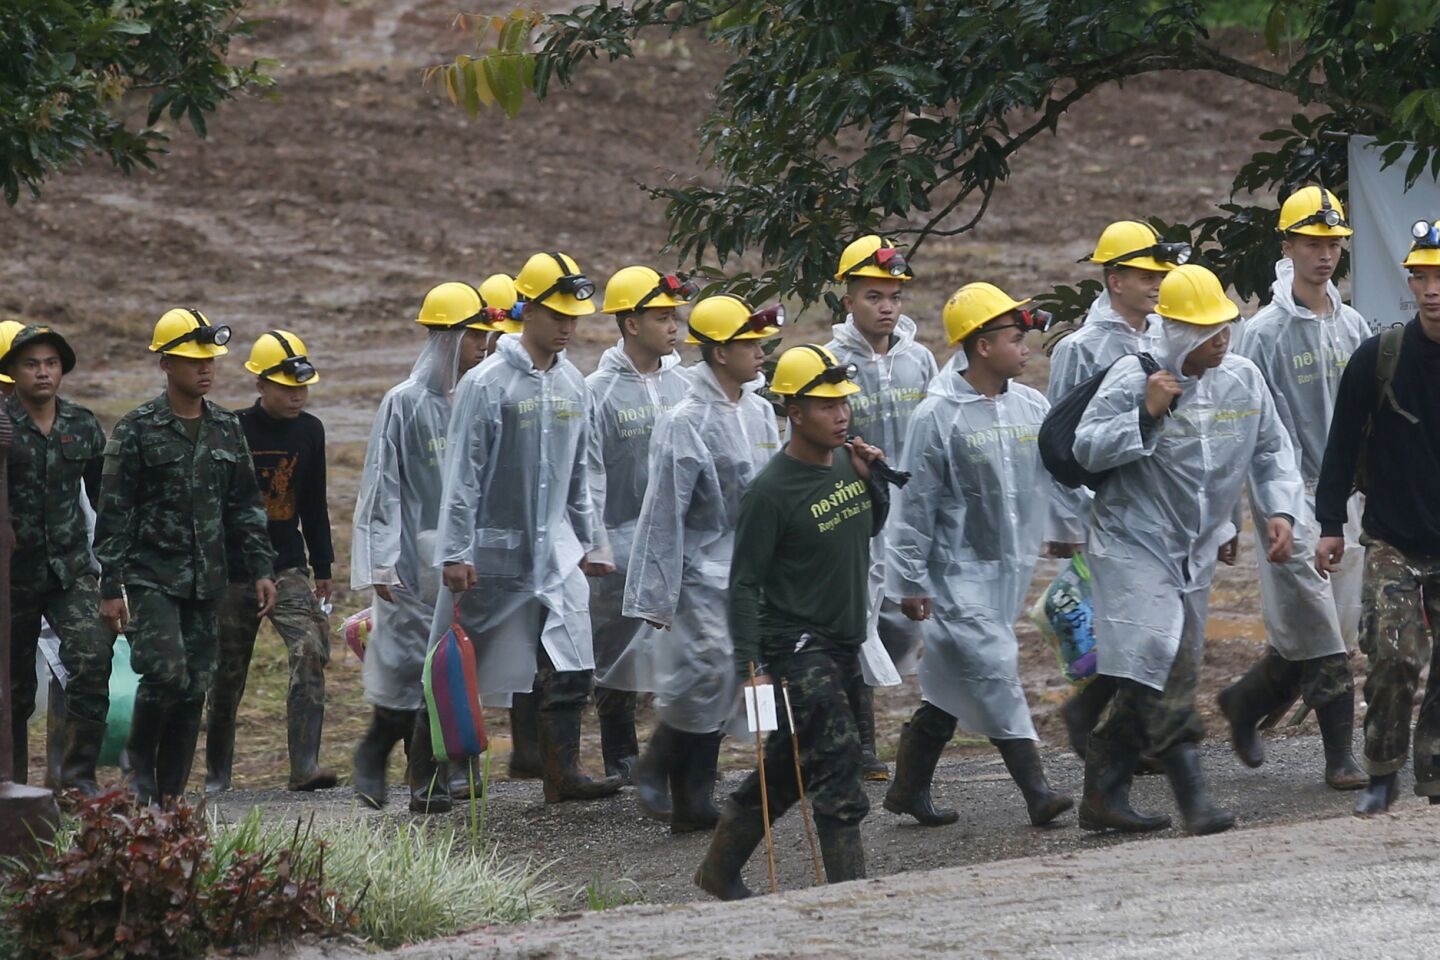 Rescuers walk toward the entrance to a cave complex near Mae Sai, Thailand, before beginning operations July 10 to retrieve the last of those trapped inside the cavern.